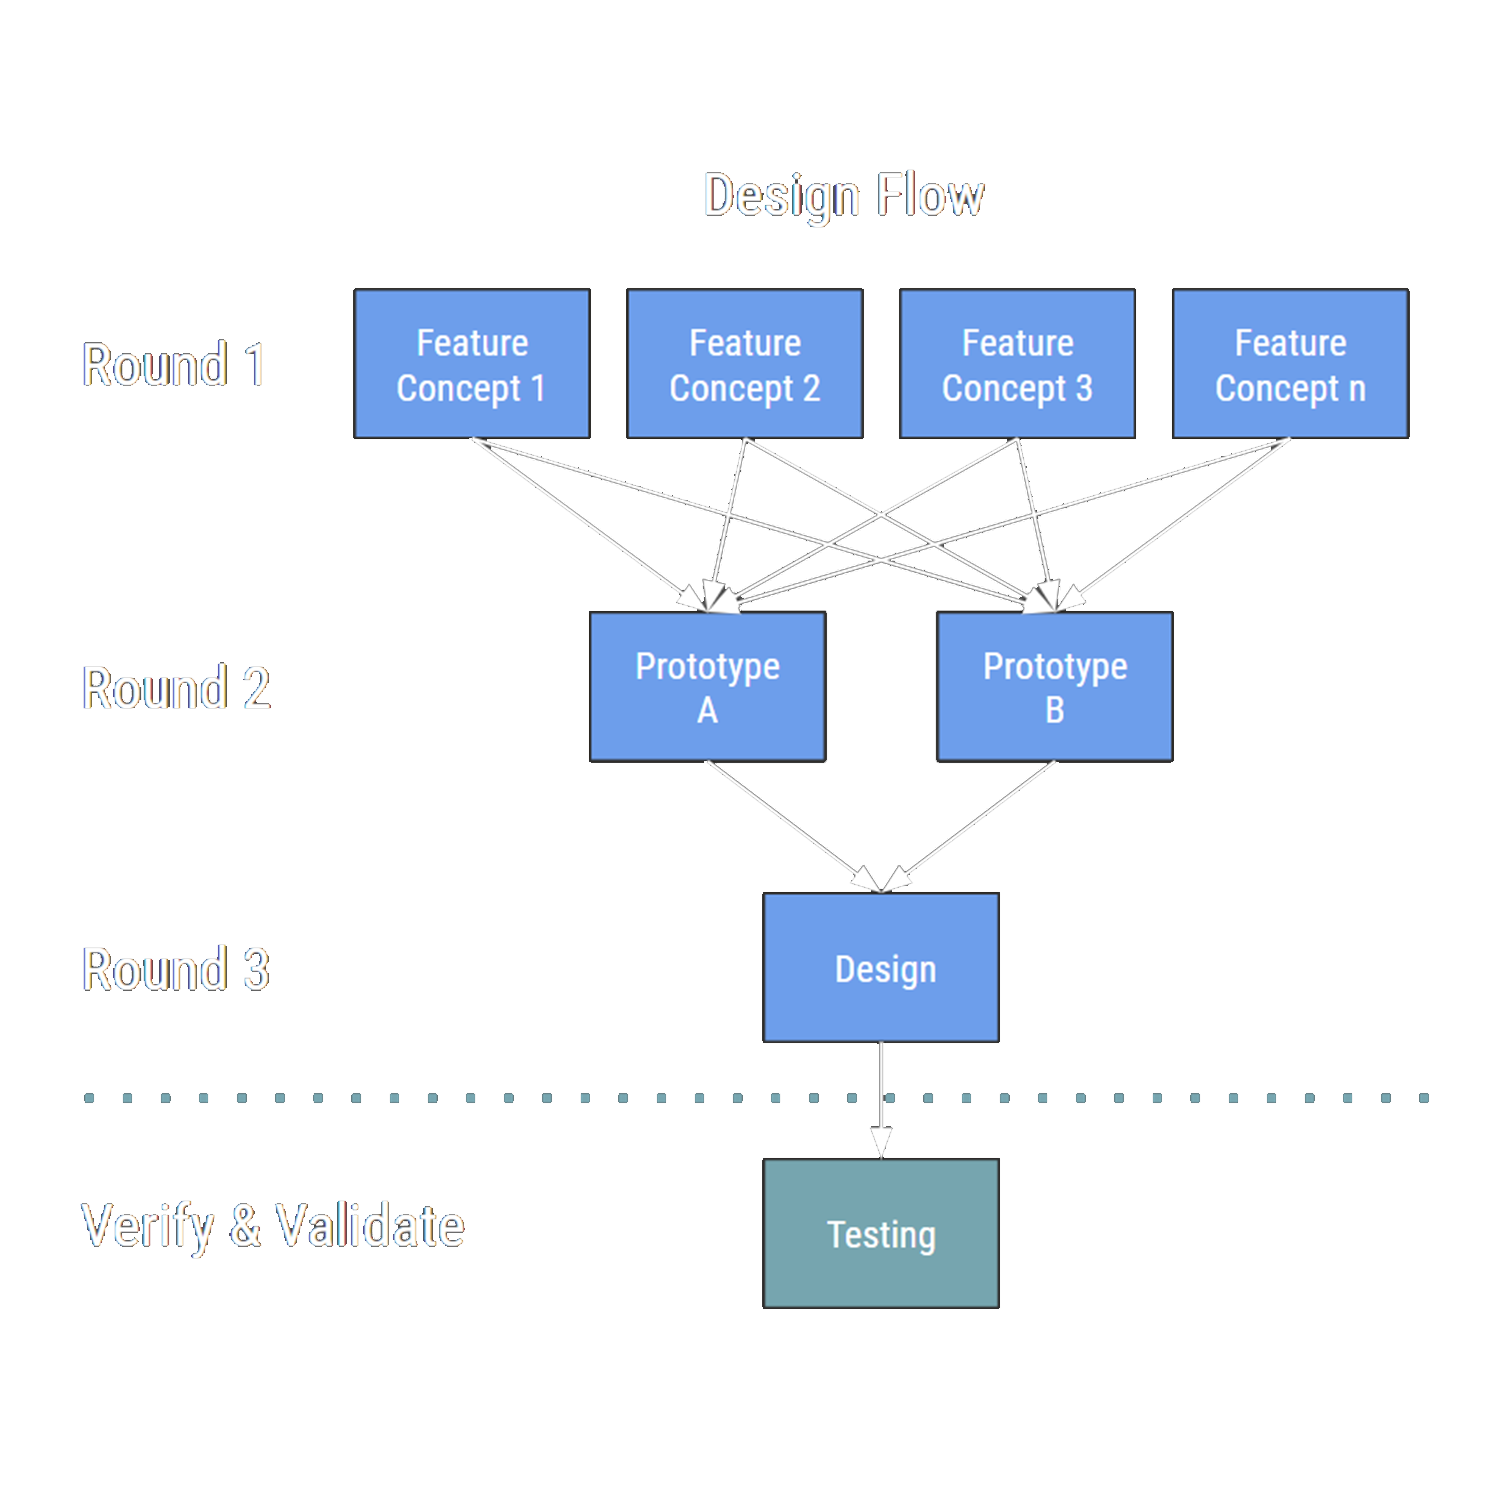 Graphic showing how feature concepts merge into two prototypes and finally merge into one design. That design then is subject to testing.